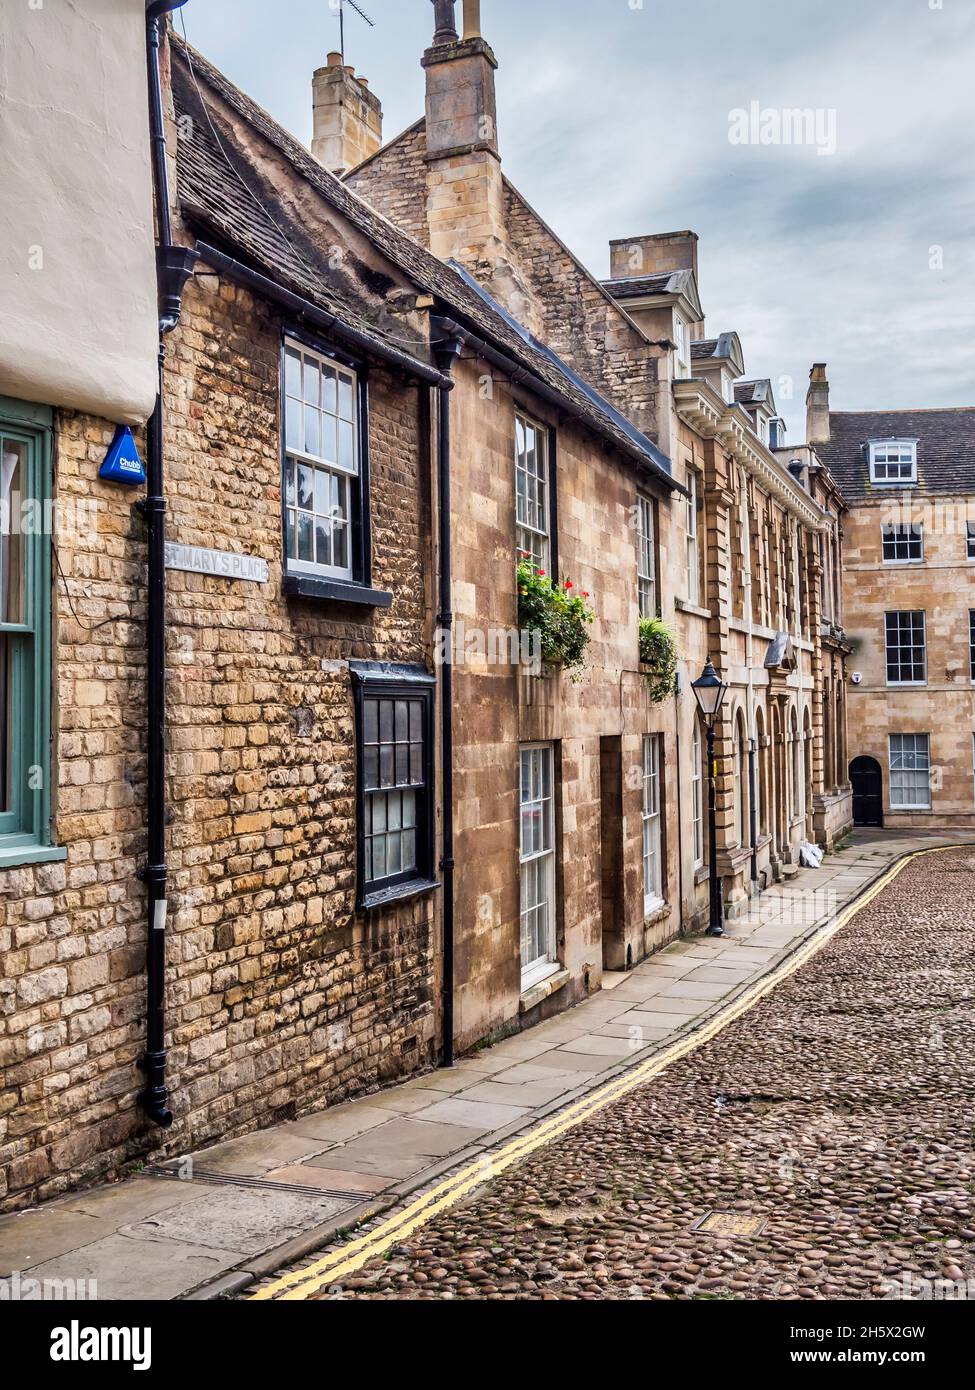 Colourful street scene in the Lincolnshire town of Stamford famous for its narrow street with buff stone buildings and Georgian architecture Stock Photo